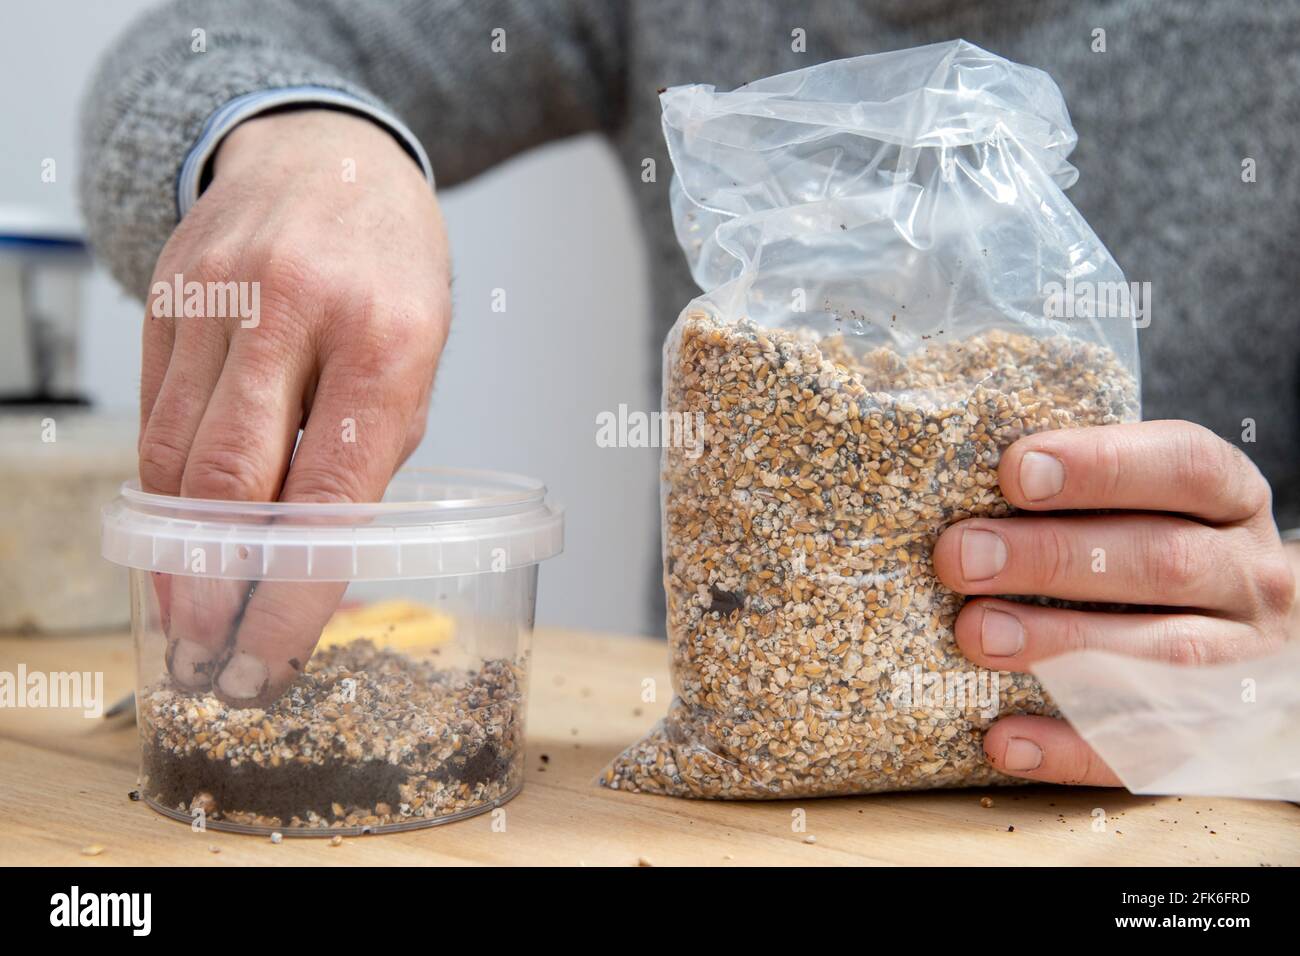 https://c8.alamy.com/comp/2FK6FRD/nuremberg-germany-19th-apr-2021-ralph-haydl-sprinkles-mushroom-spawn-and-coffee-grounds-into-the-pot-of-a-mushroom-growing-kit-for-oyster-mushrooms-the-41-year-old-from-nuremberg-has-been-selling-mushroom-cultivation-sets-for-several-years-with-which-you-can-grow-different-oyster-mushrooms-yellow-lemon-mushrooms-or-pink-rose-mushrooms-at-home-to-dpa-delicious-mushrooms-on-old-coffee-niche-or-trend-credit-daniel-karmanndpaalamy-live-news-2FK6FRD.jpg